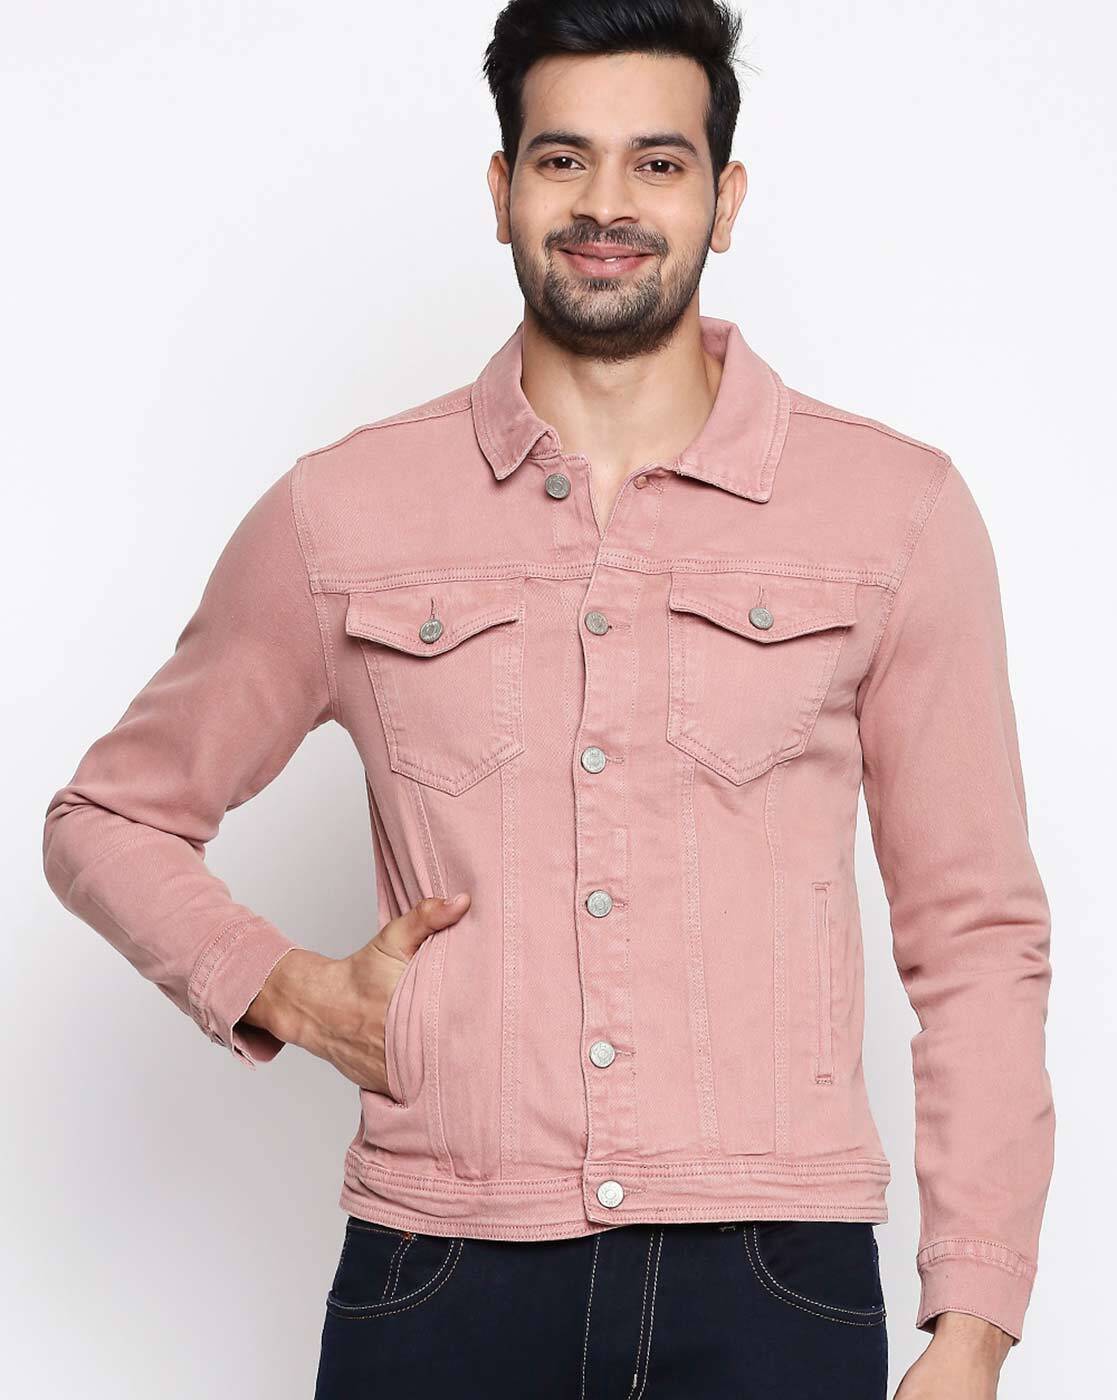 Mens Fashion Casual Pink Tops Slim Fit Jeans Jacket Hole Ripped Coats Teen  | eBay